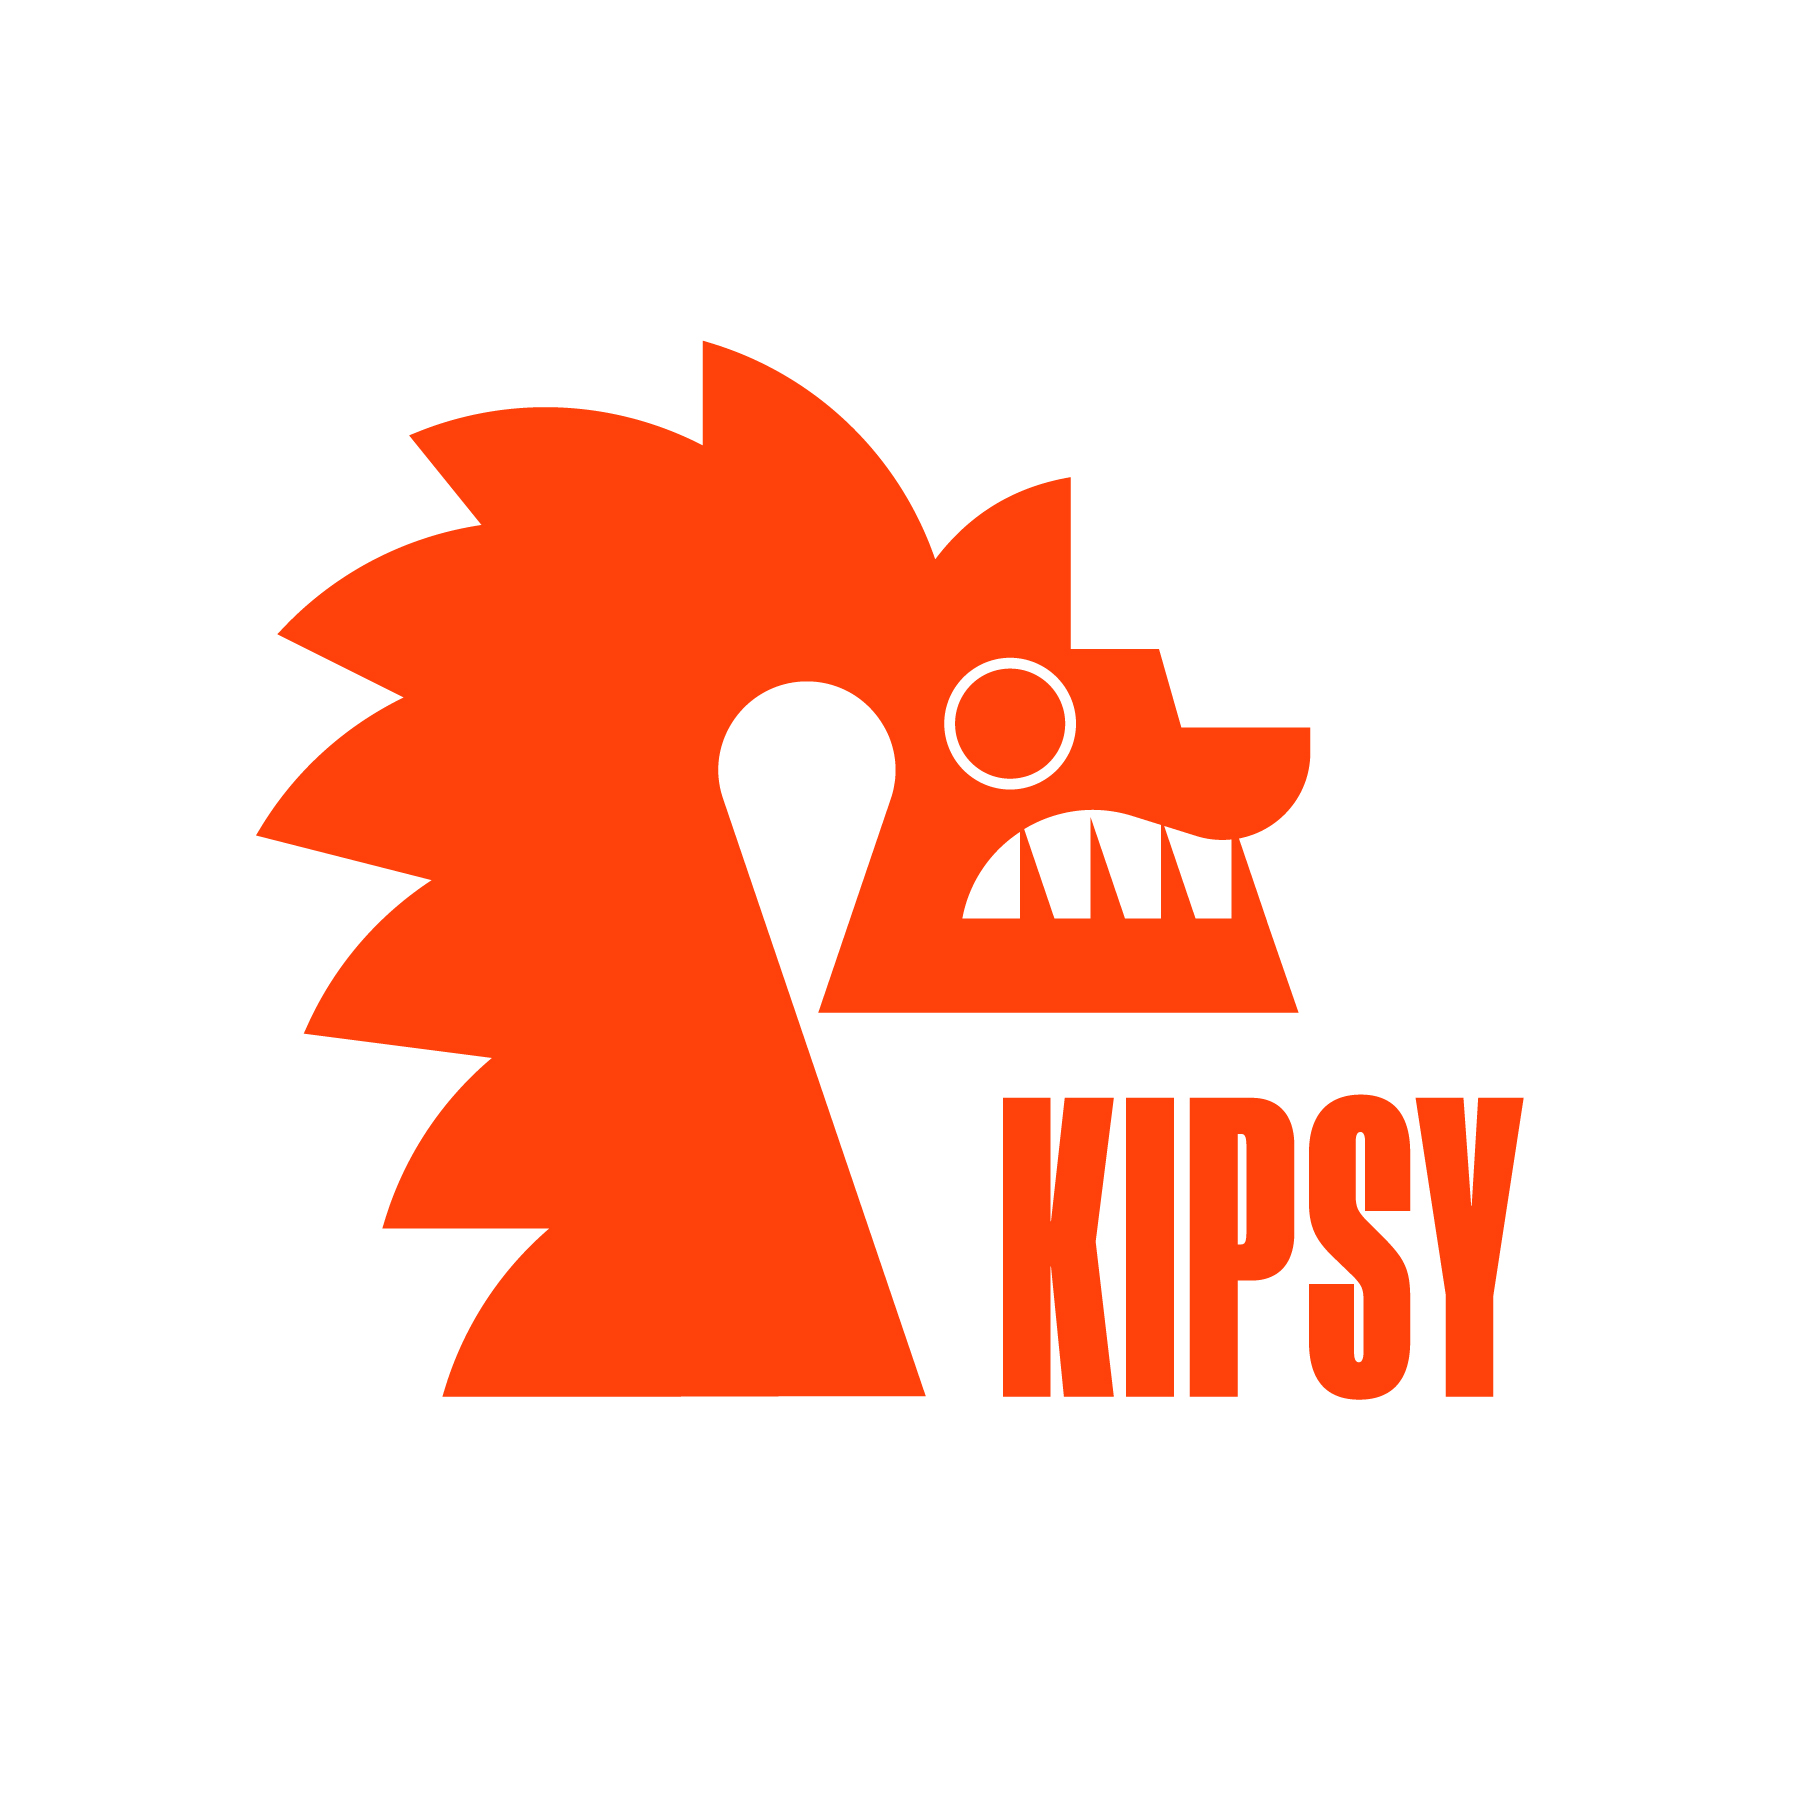 Kipsy Boat Tours logo design by logo designer Penda Design for your inspiration and for the worlds largest logo competition